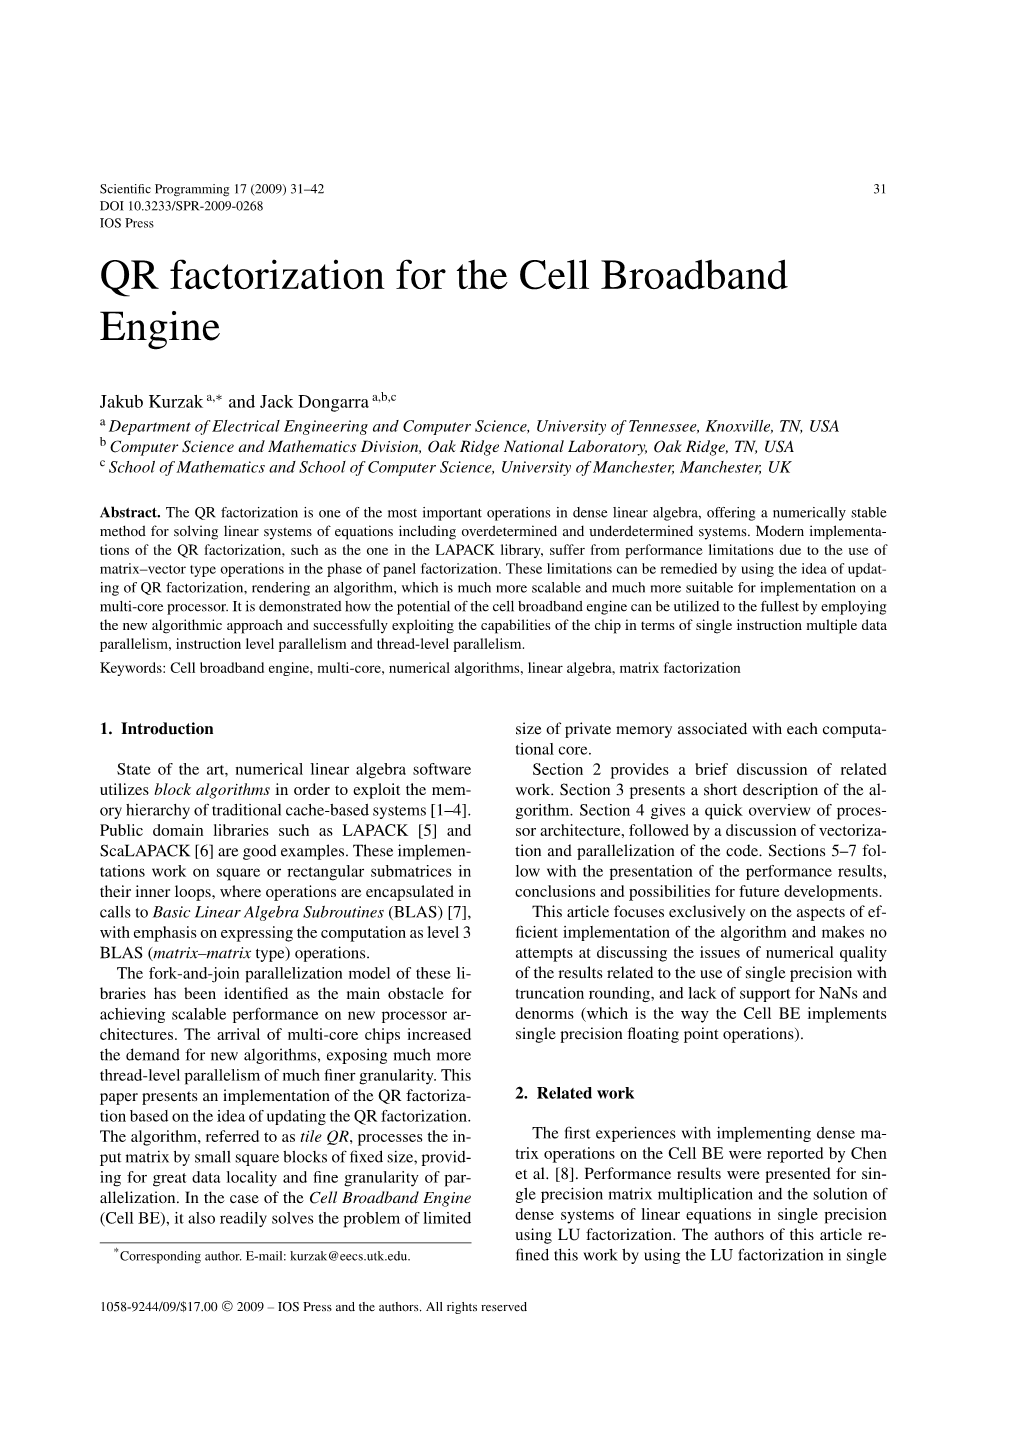 QR Factorization for the Cell Broadband Engine